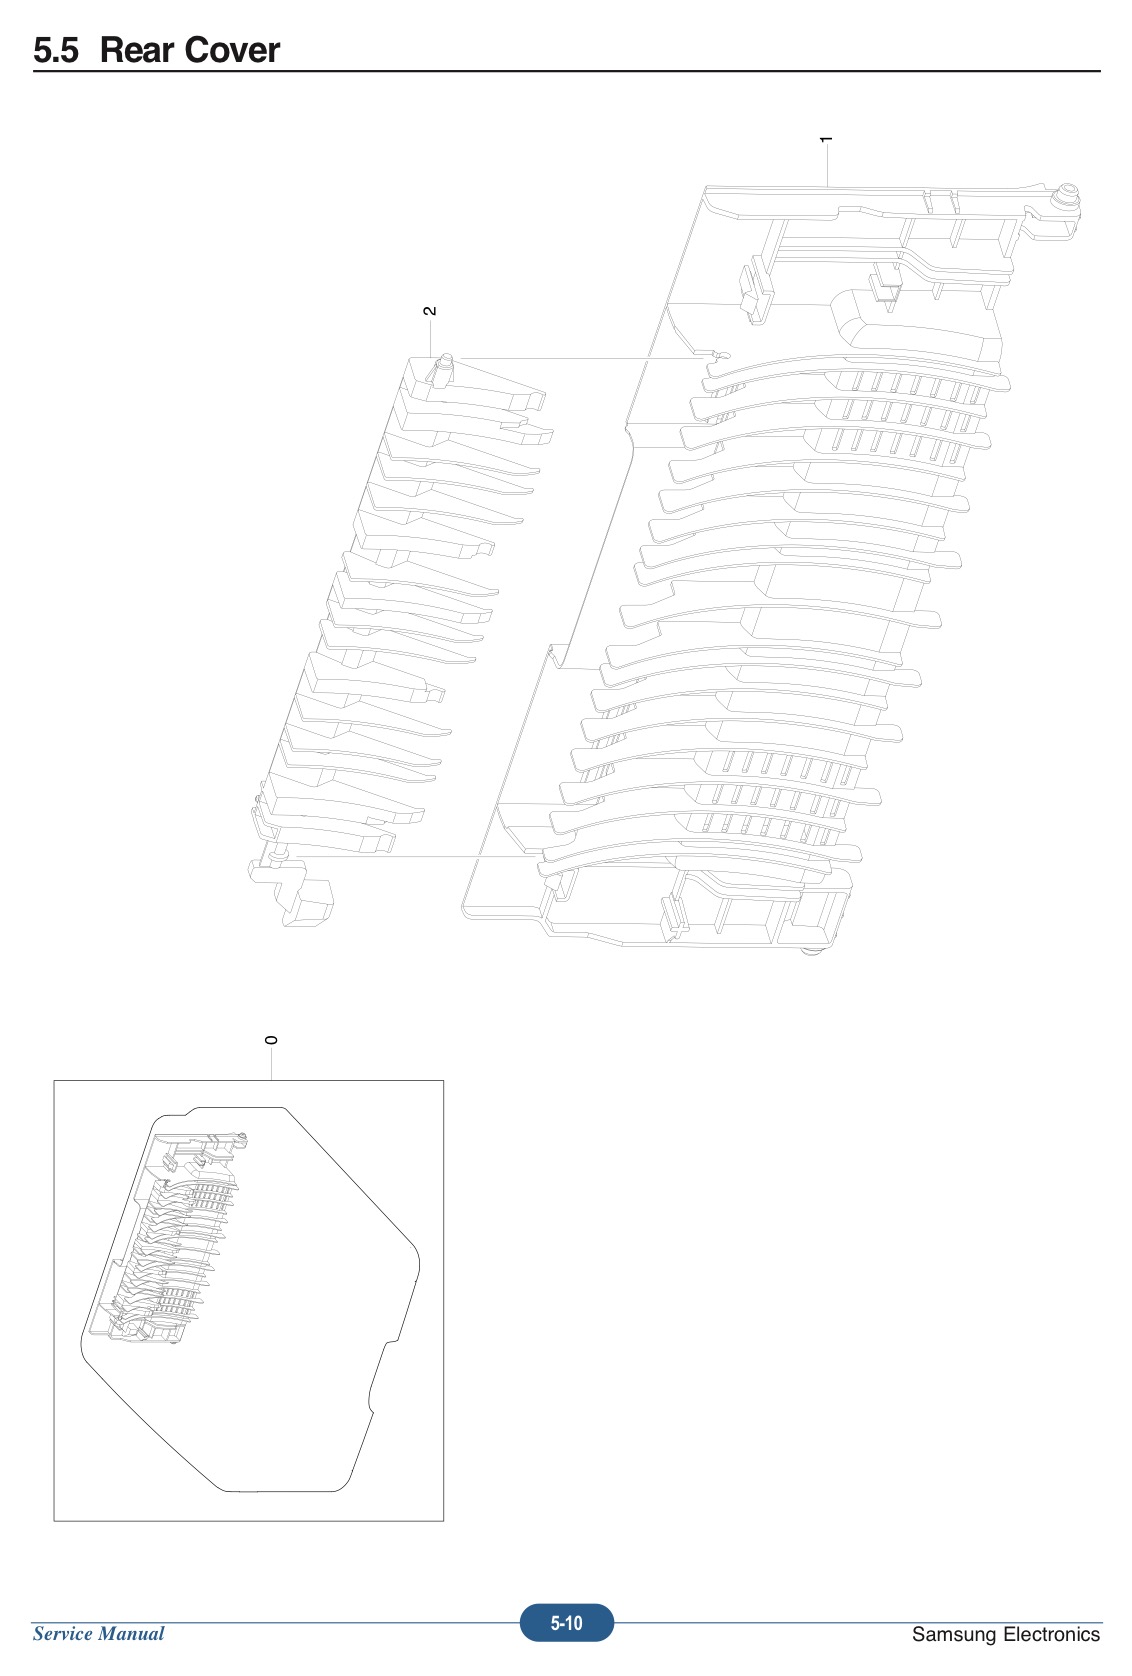 pg 5-10 from Parts Diagram of ML-2851